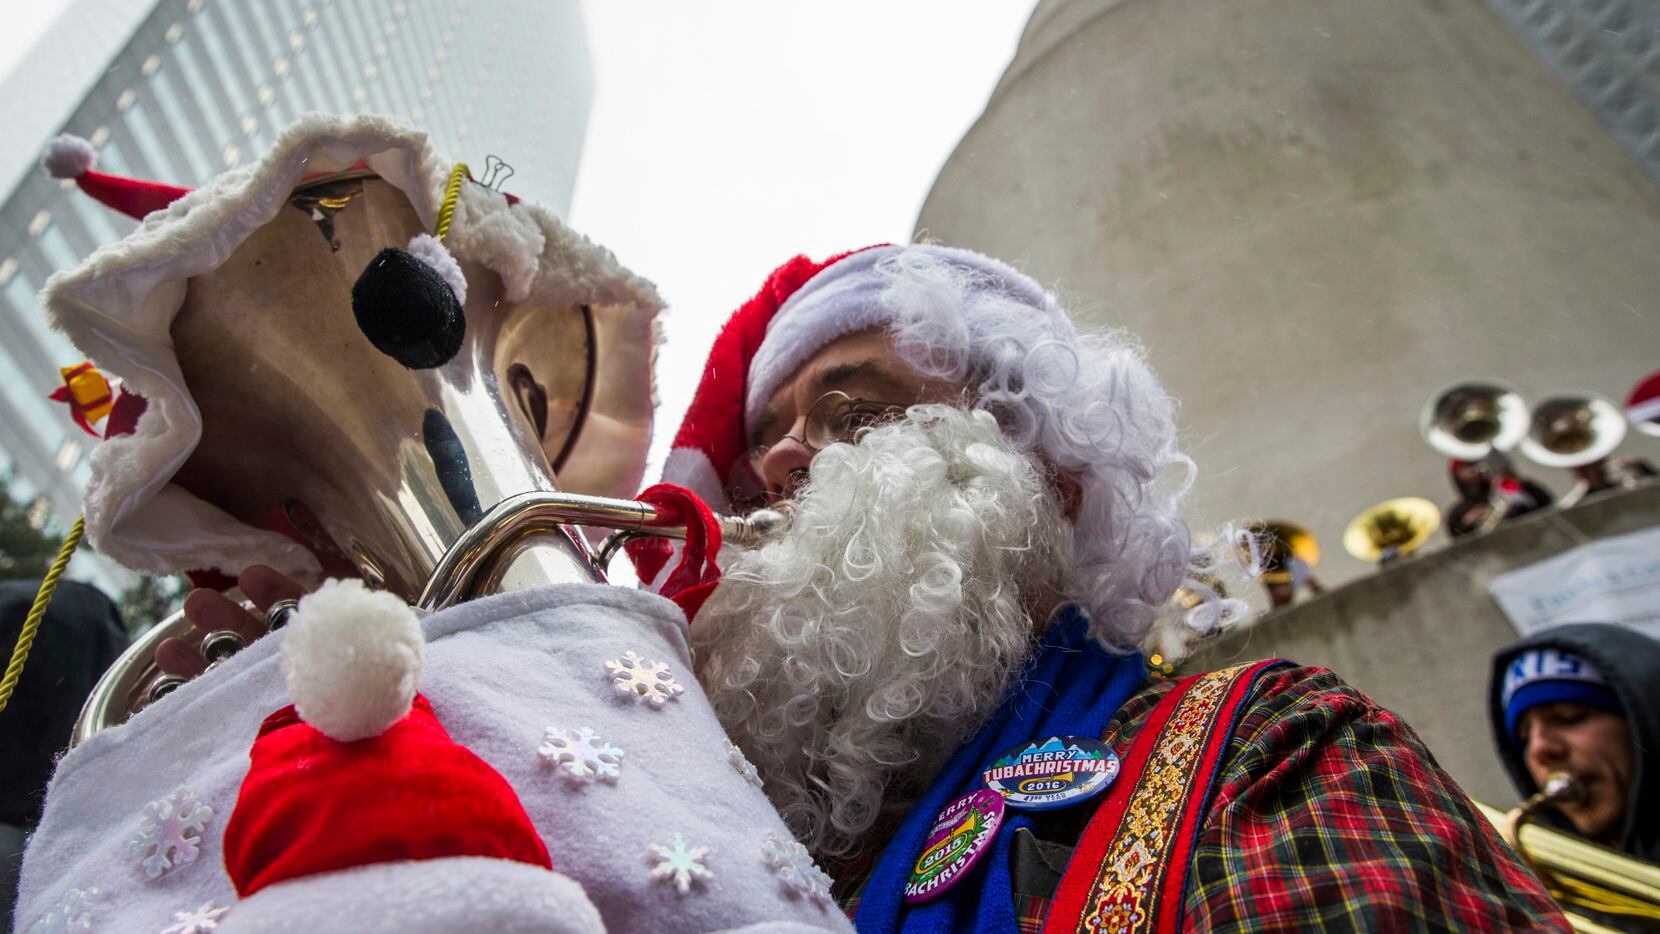 Warren Brooks, who is dressed as Santa Claus, performs with over 250 other tuba, sousaphone and euphonium players during the 39th annual Tuba Christmas on Friday, December 23, 2016 at Thanksgiving Square in downtown Dallas. (Ashley Landis/The Dallas Morning News)